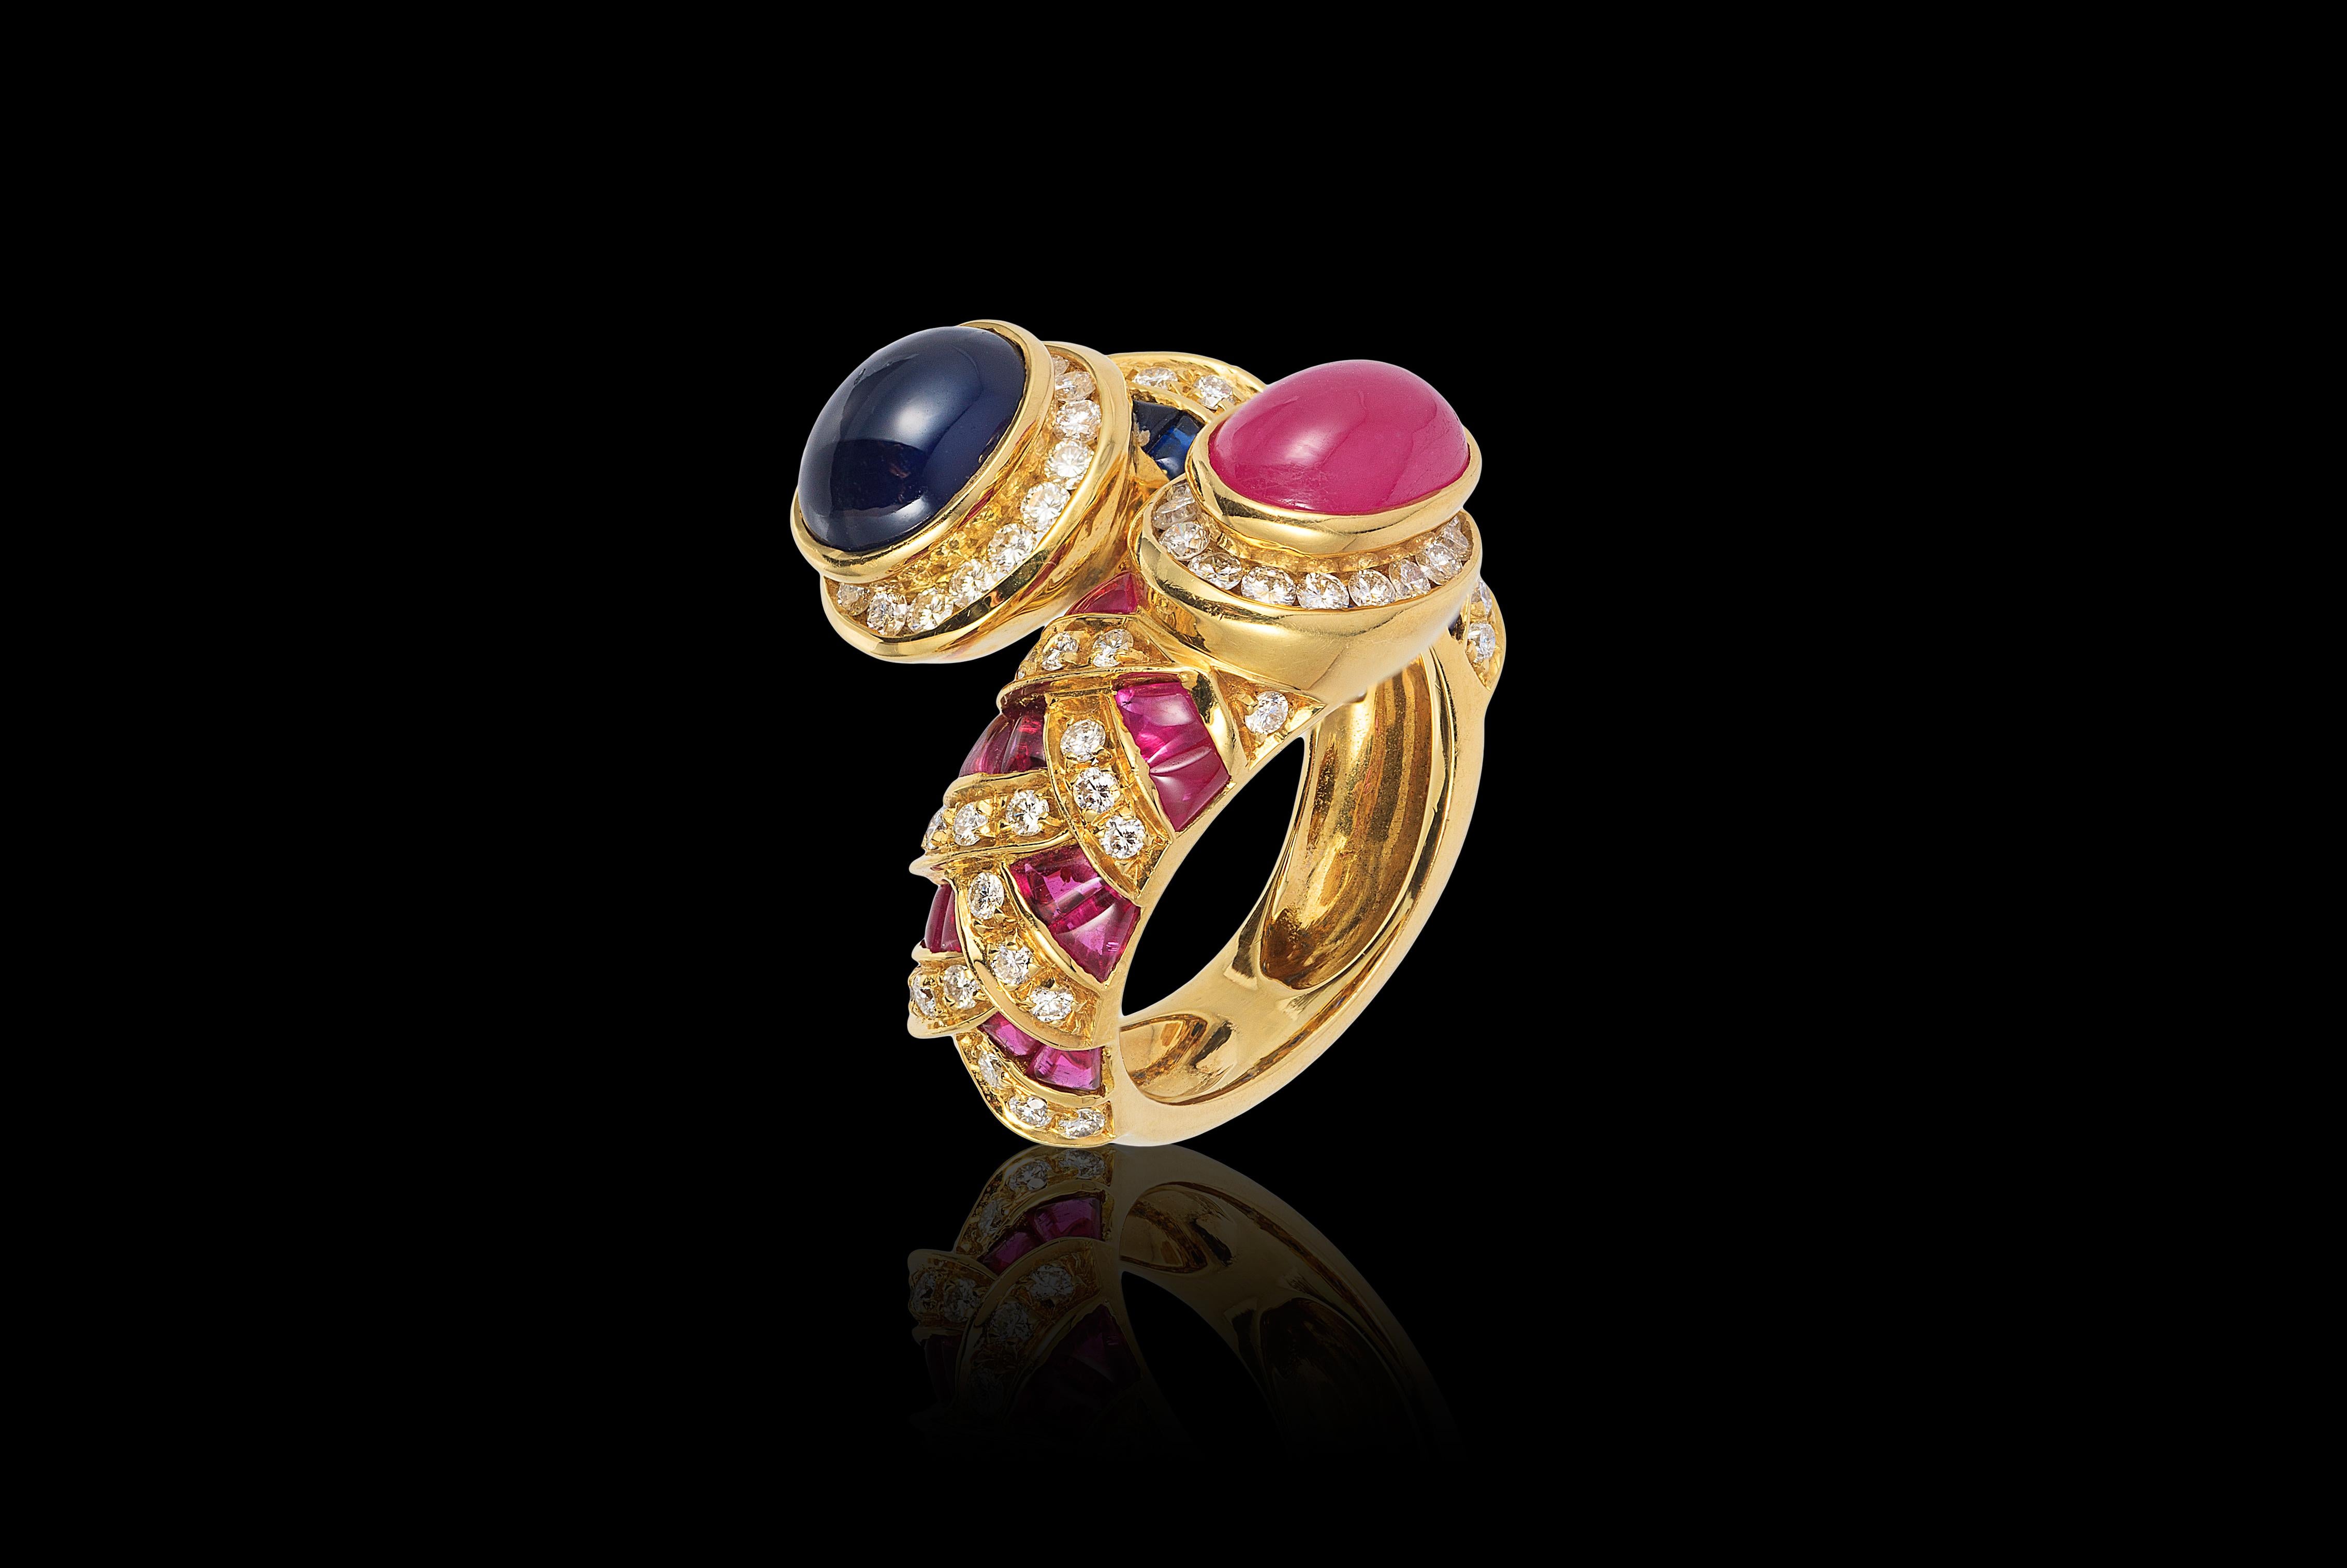 Andreoli Blue Sapphire Ruby Cabochon Bypass Cocktail Ring 18 Karat Yellow Gold. This ring features 1.12 carat of F-G-H Color VS-SI Clarity brilliant full round cut diamonds. 4.94 carat Blue Sapphires, 3.72 carat Ruby and set in 16.20 grams of 18